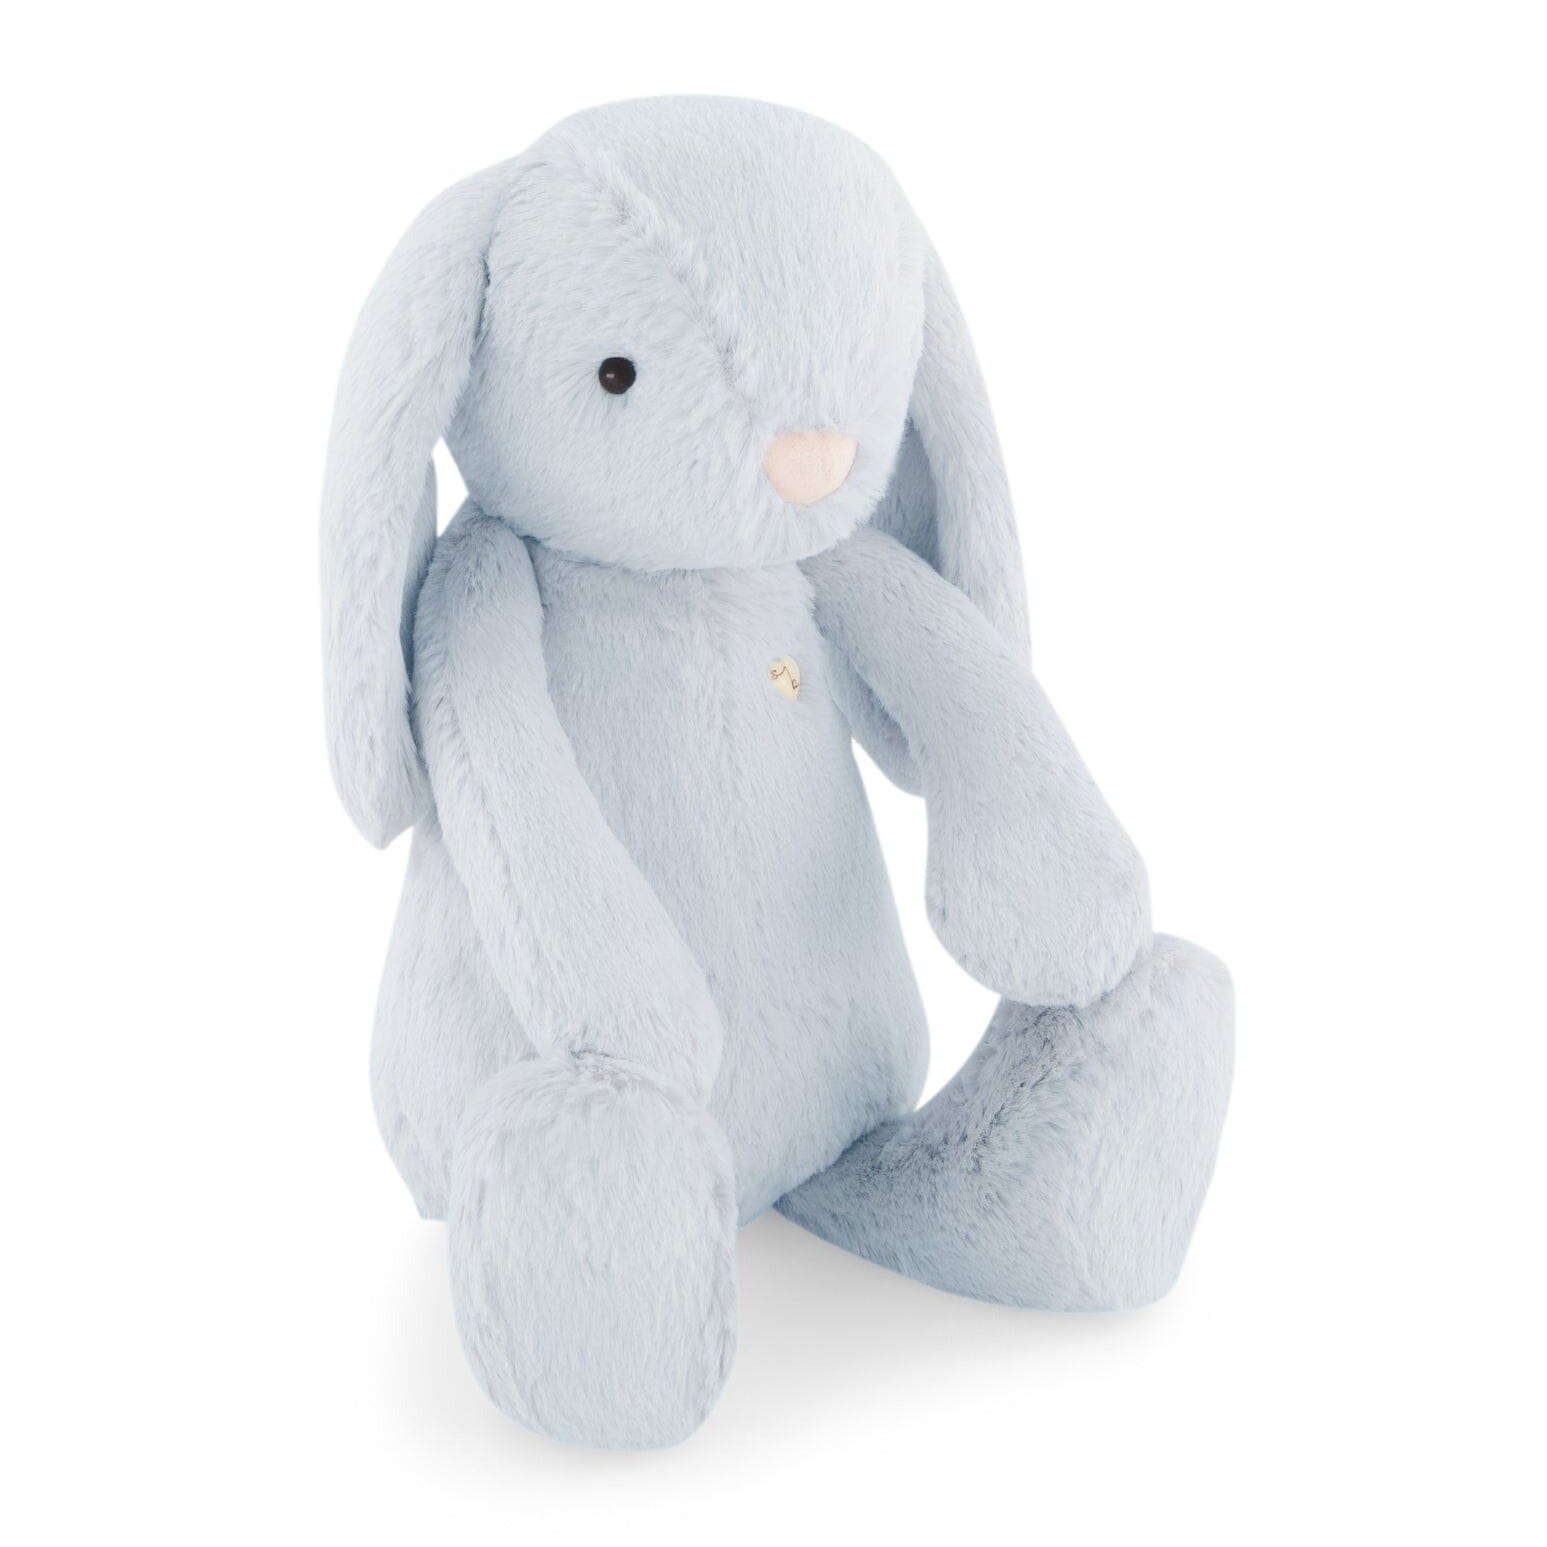 Penelope The Bunny - Snuggle Bunnies - Droplet